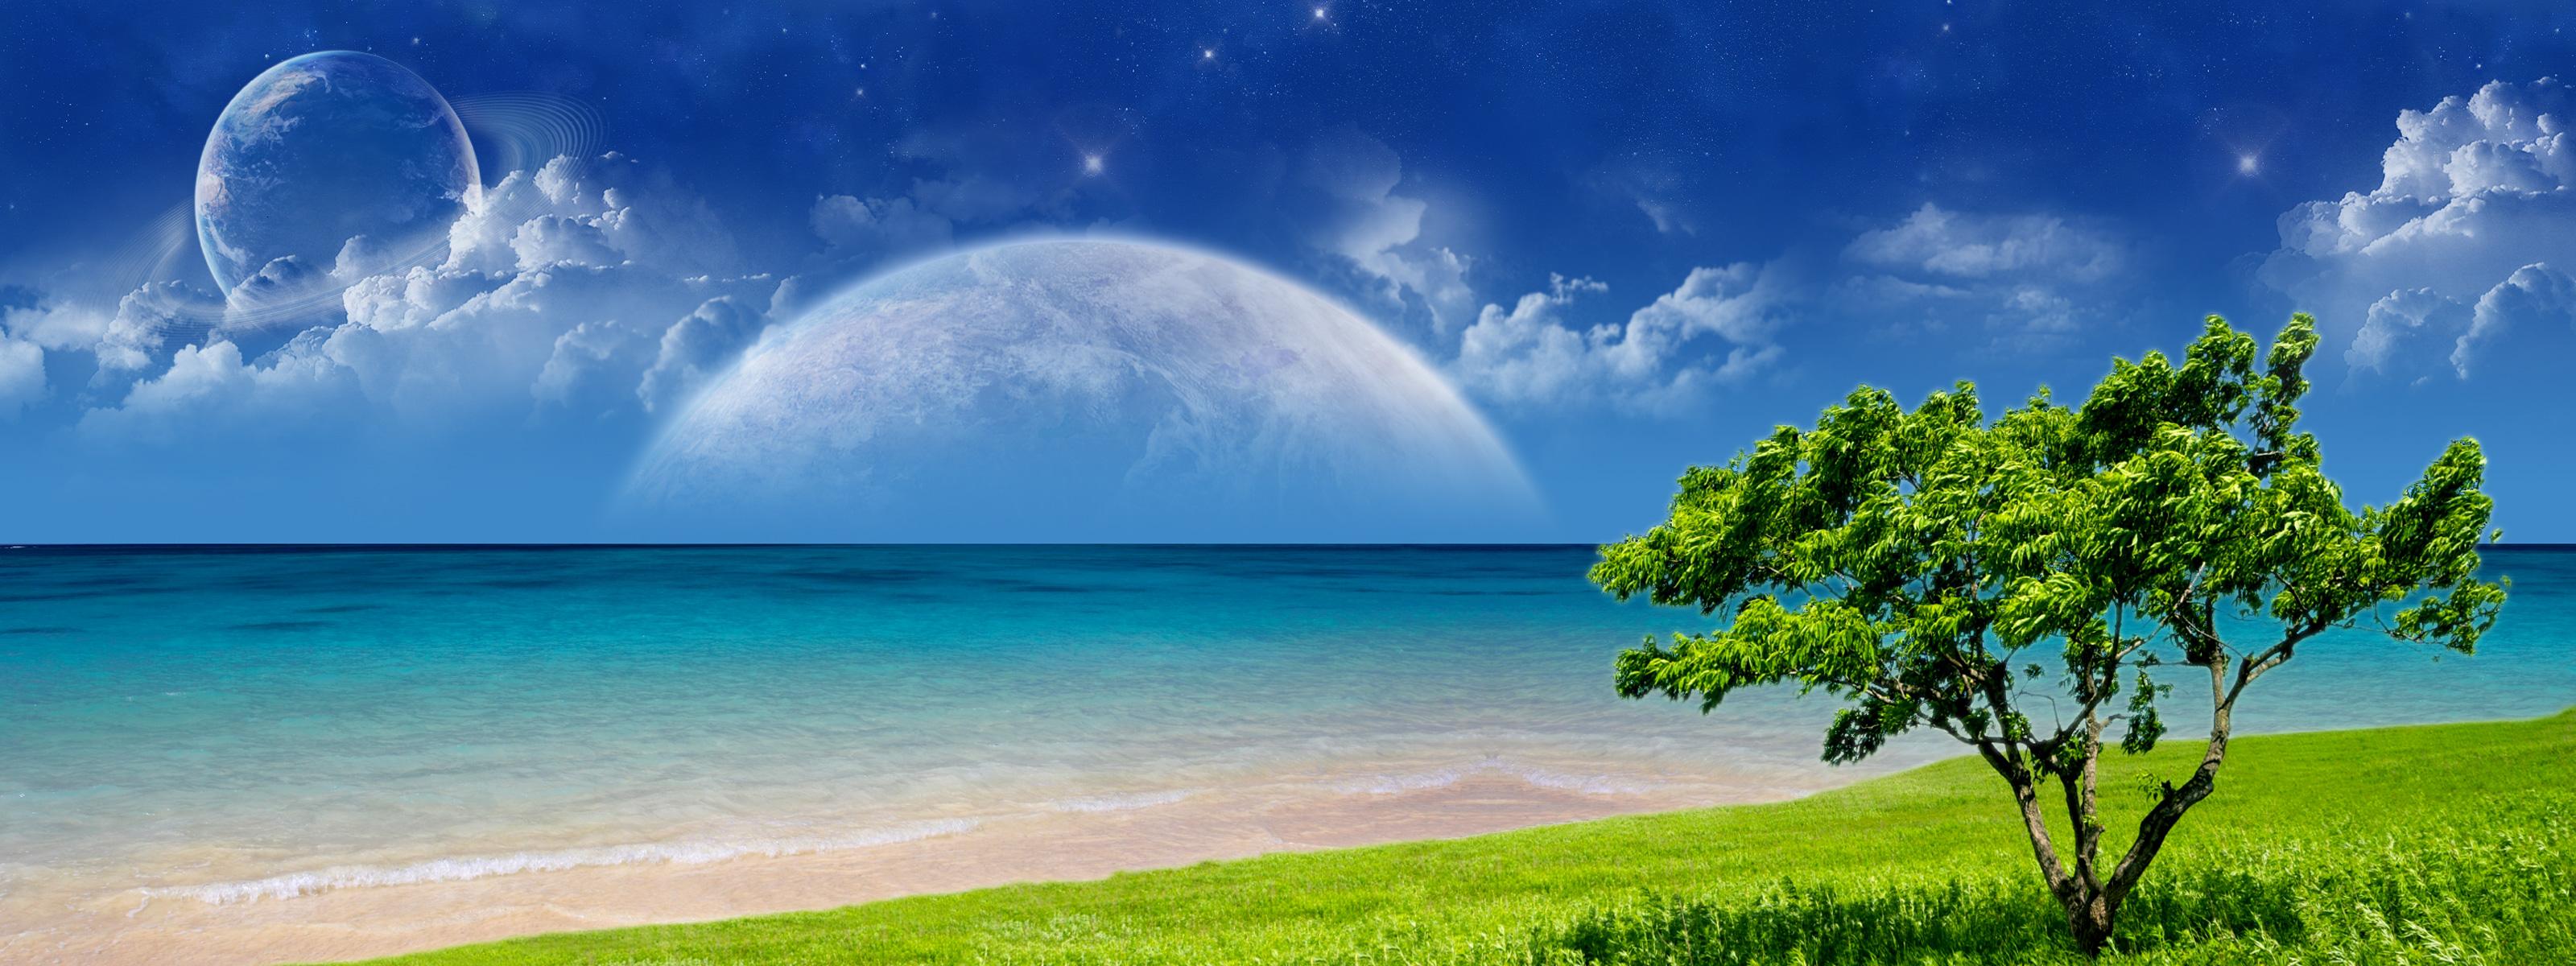 Scenic landscape featuring a planet, ocean, and tree